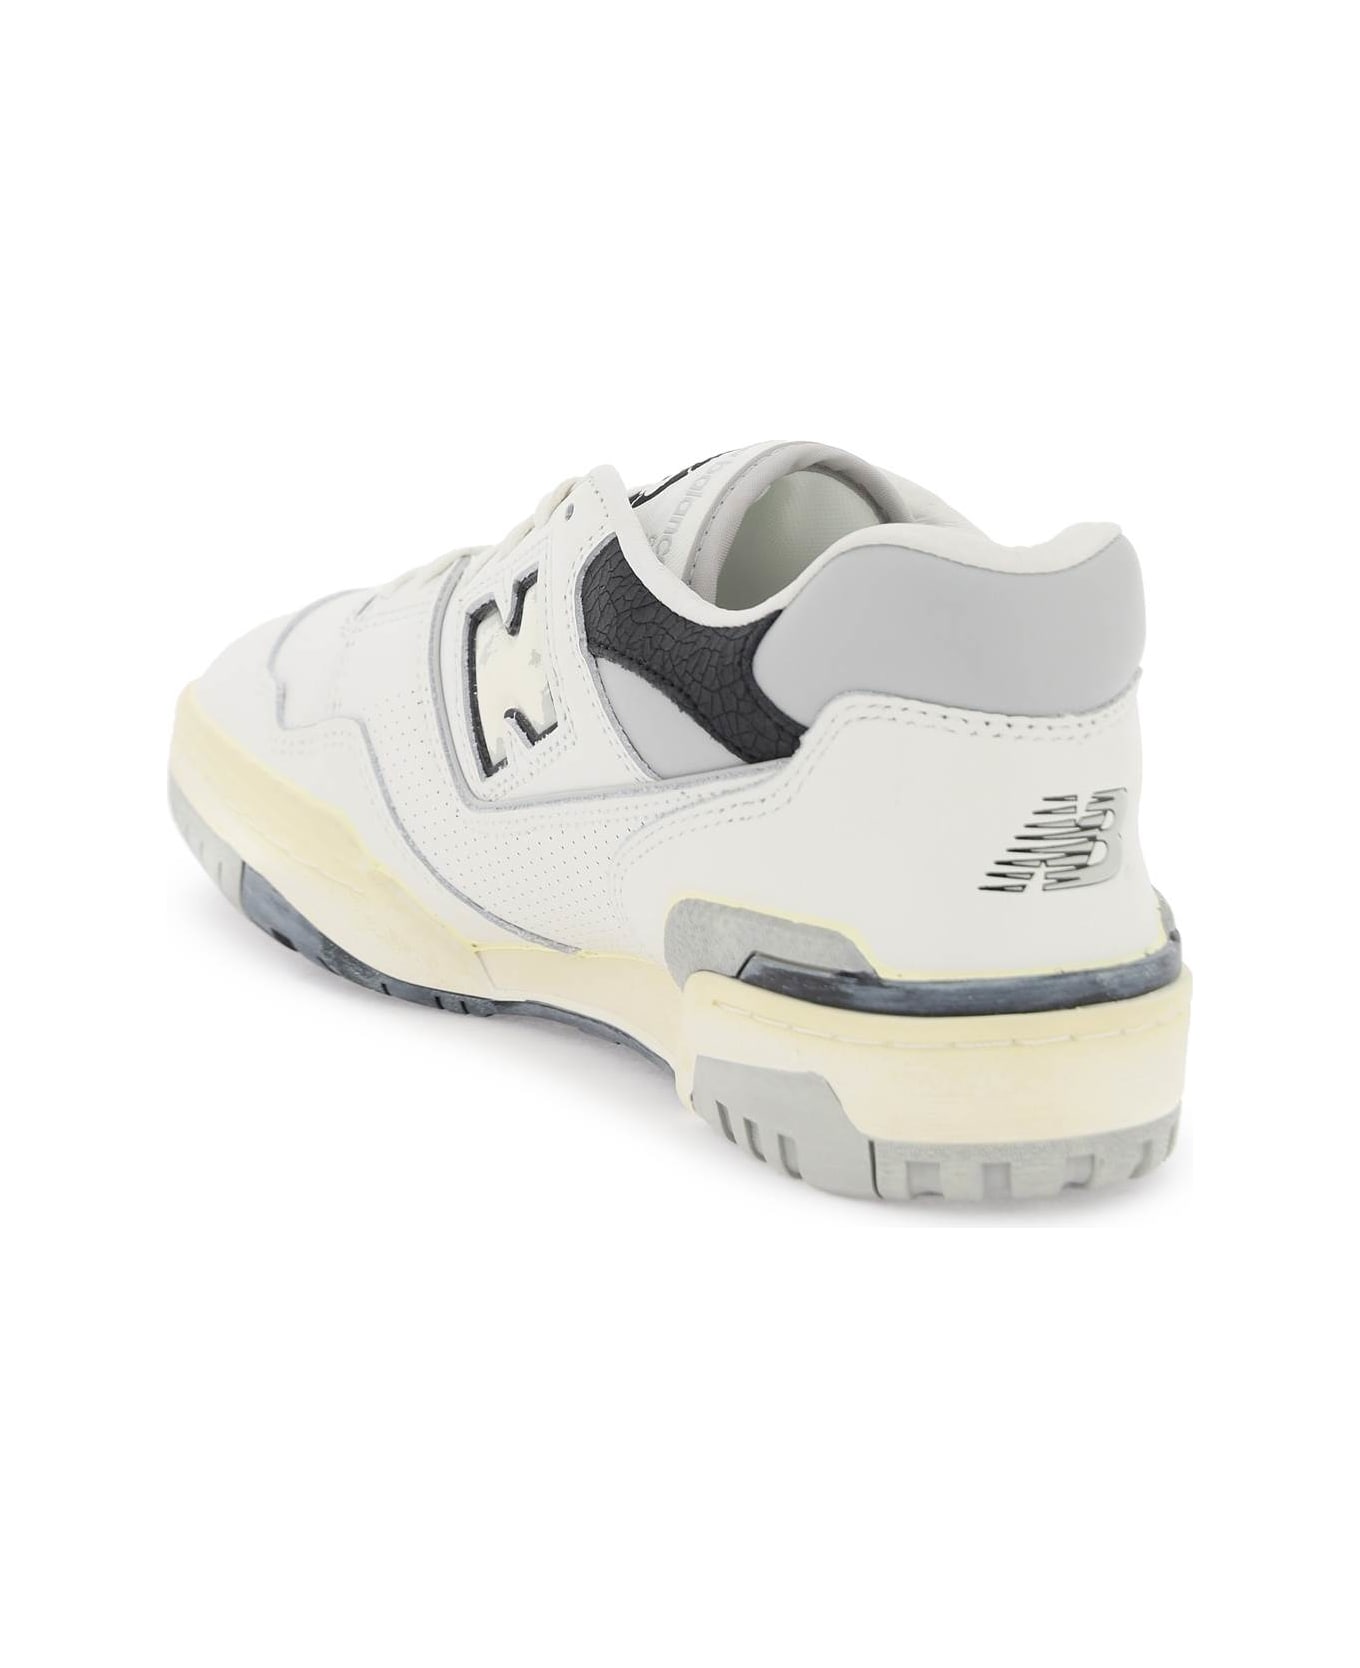 New Balance Vintage-effect 550 Sneakers - OFF WHITE GREY (White)